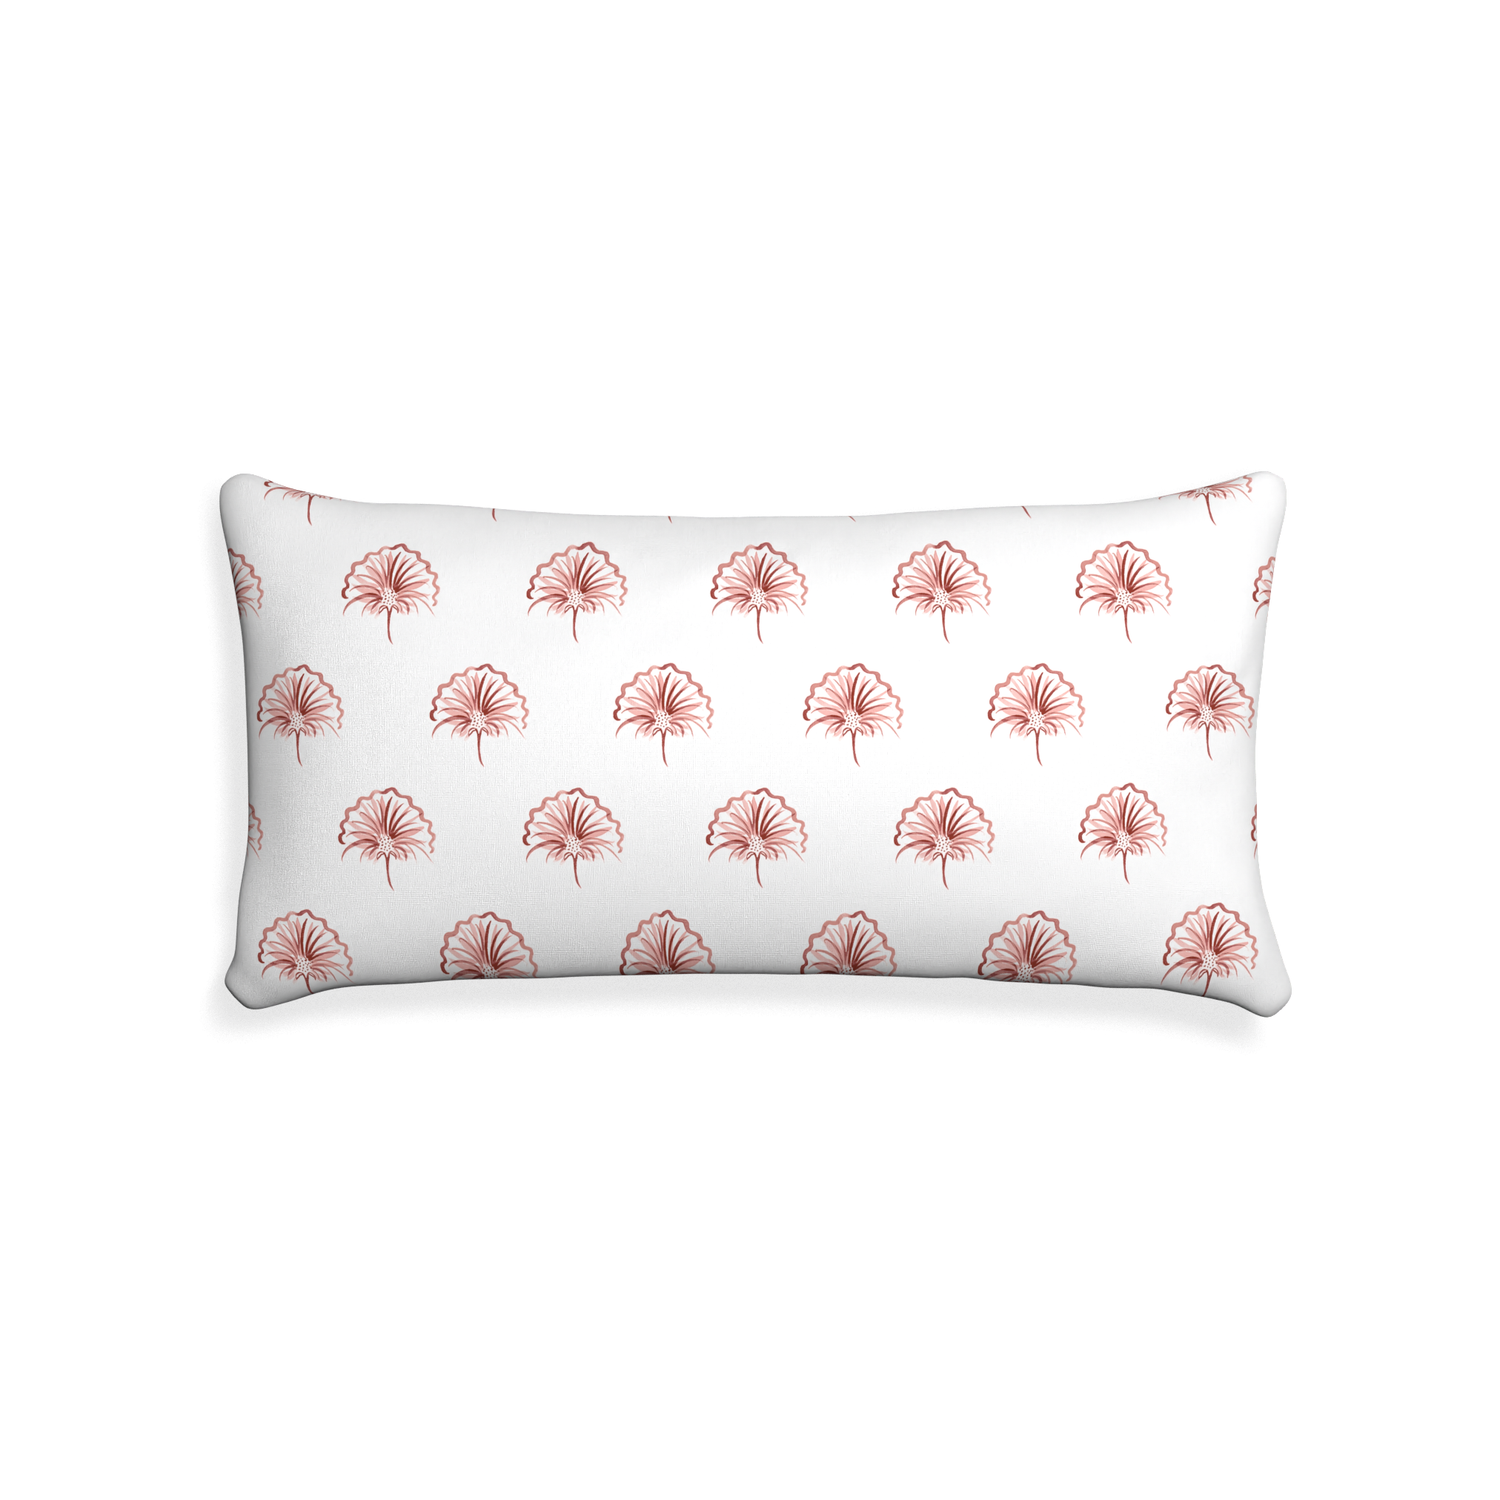 Midi-lumbar penelope rose custom floral pinkpillow with none on white background